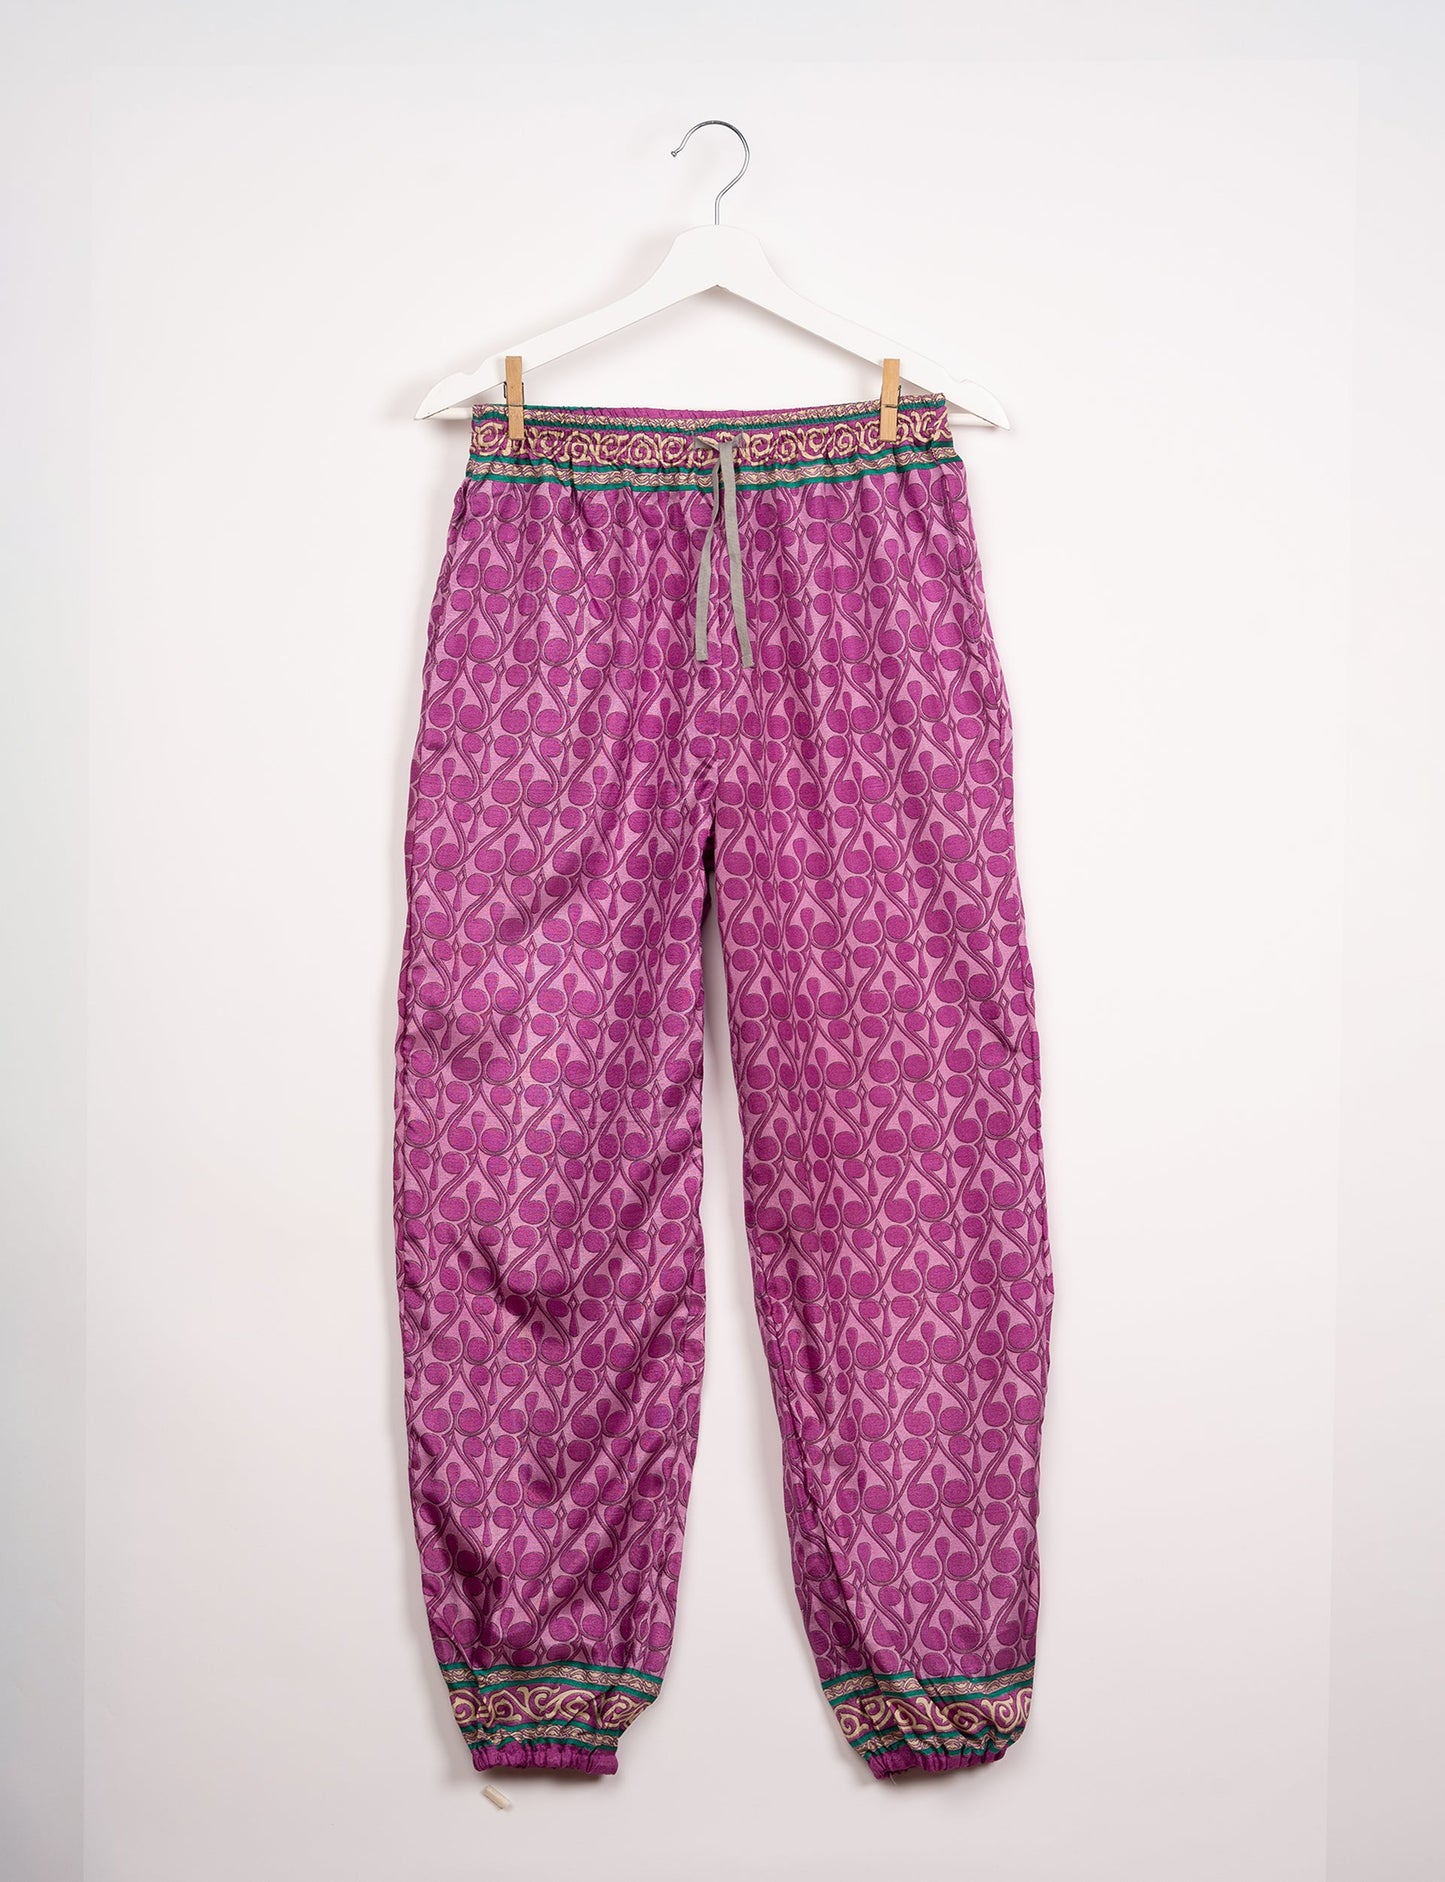 Comfortable and sustainable JOGGER PANTS, pull-on style crafted from eco-materials. Elastic drawstring waist, cotton twill tape, elasticated hems, and slant pockets for style and functionality. Make a positive impact on people and the planet with your fashion choices.